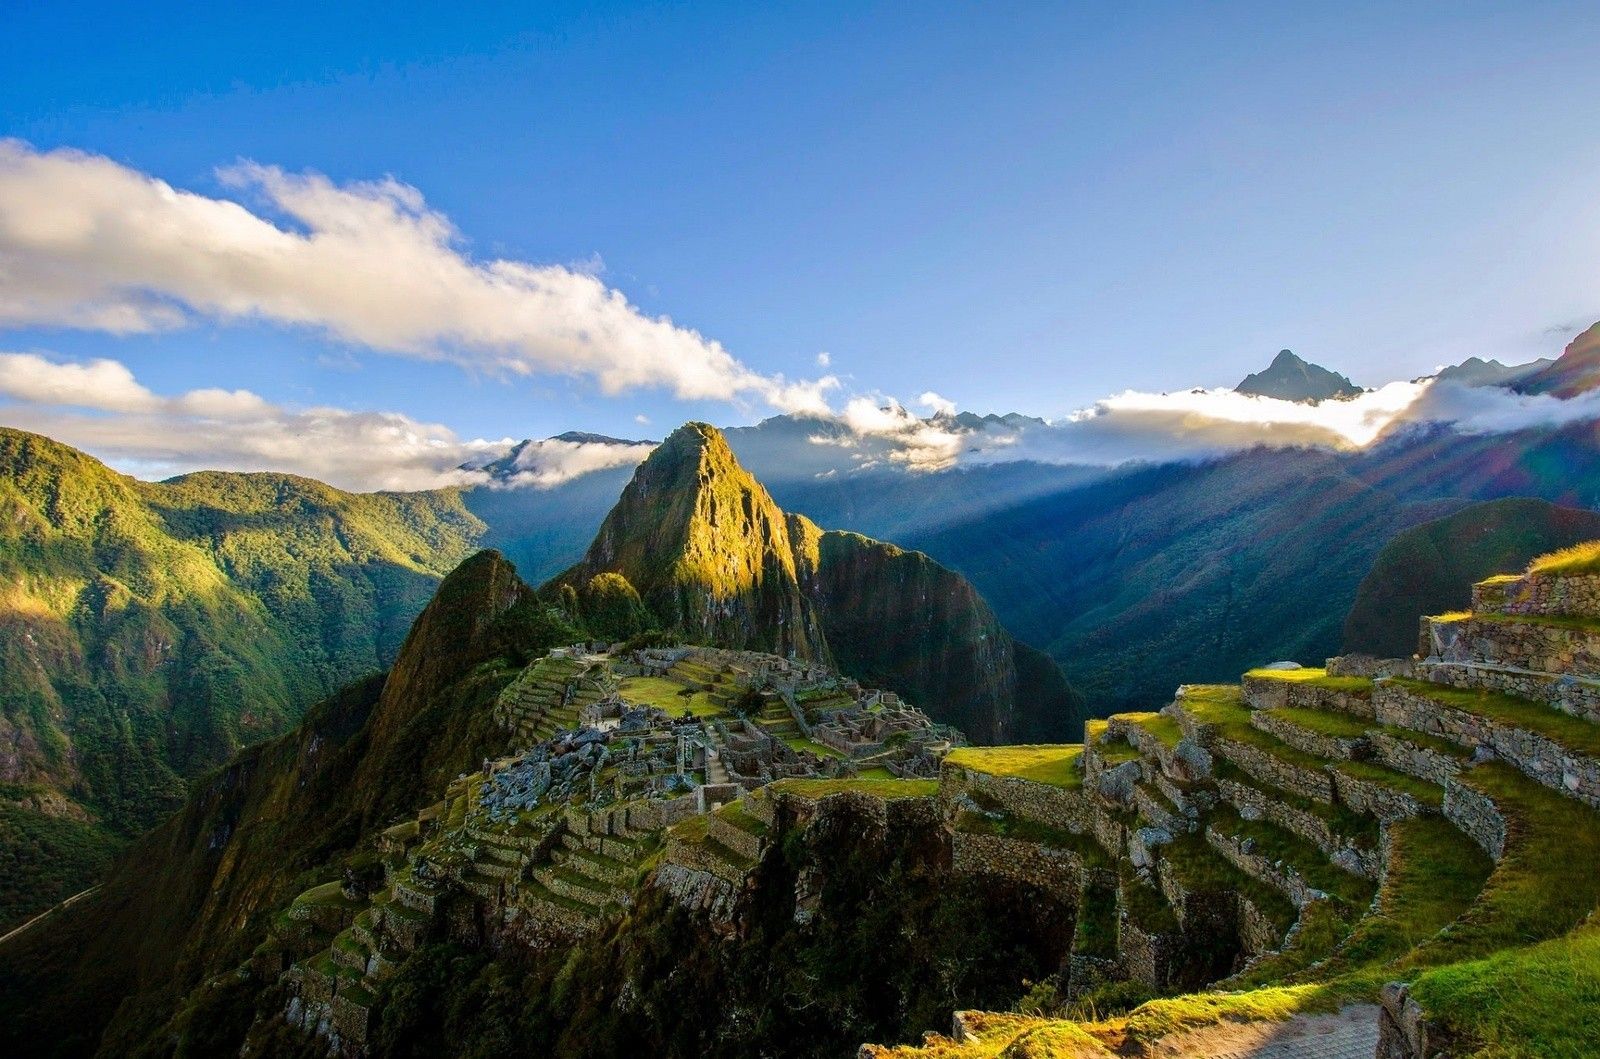 10 Machu Picchu Facts You Probably Don’t Know